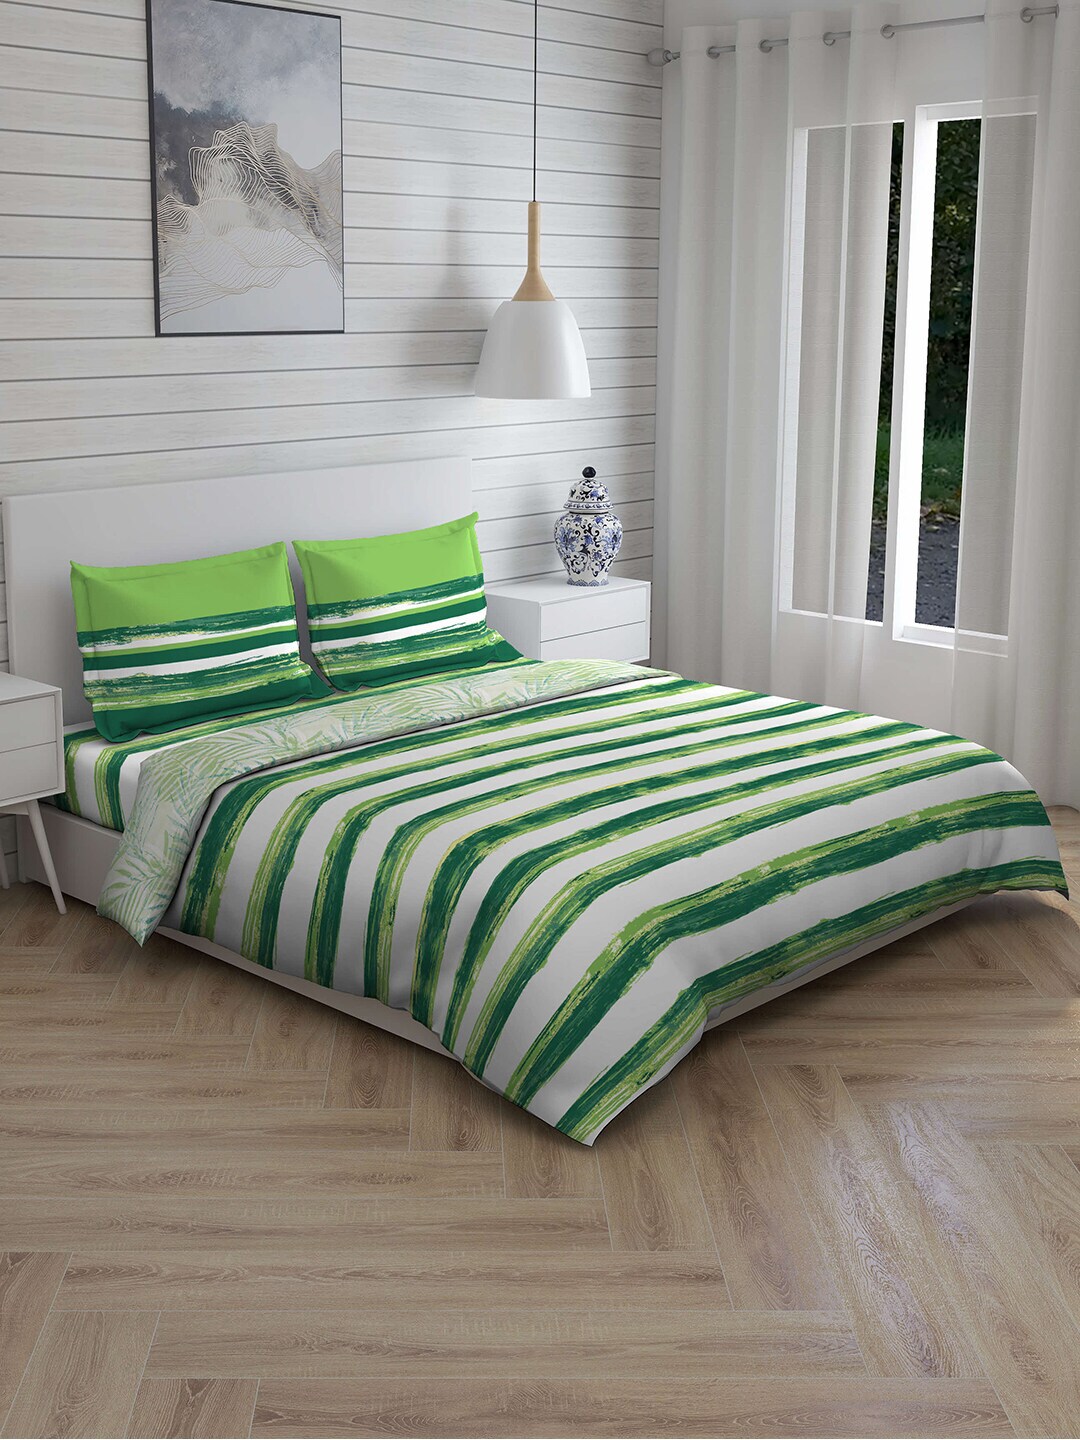 Boutique Living India Green & White Striped 148 TC 120 GSM Double King Bedding Set Price in India